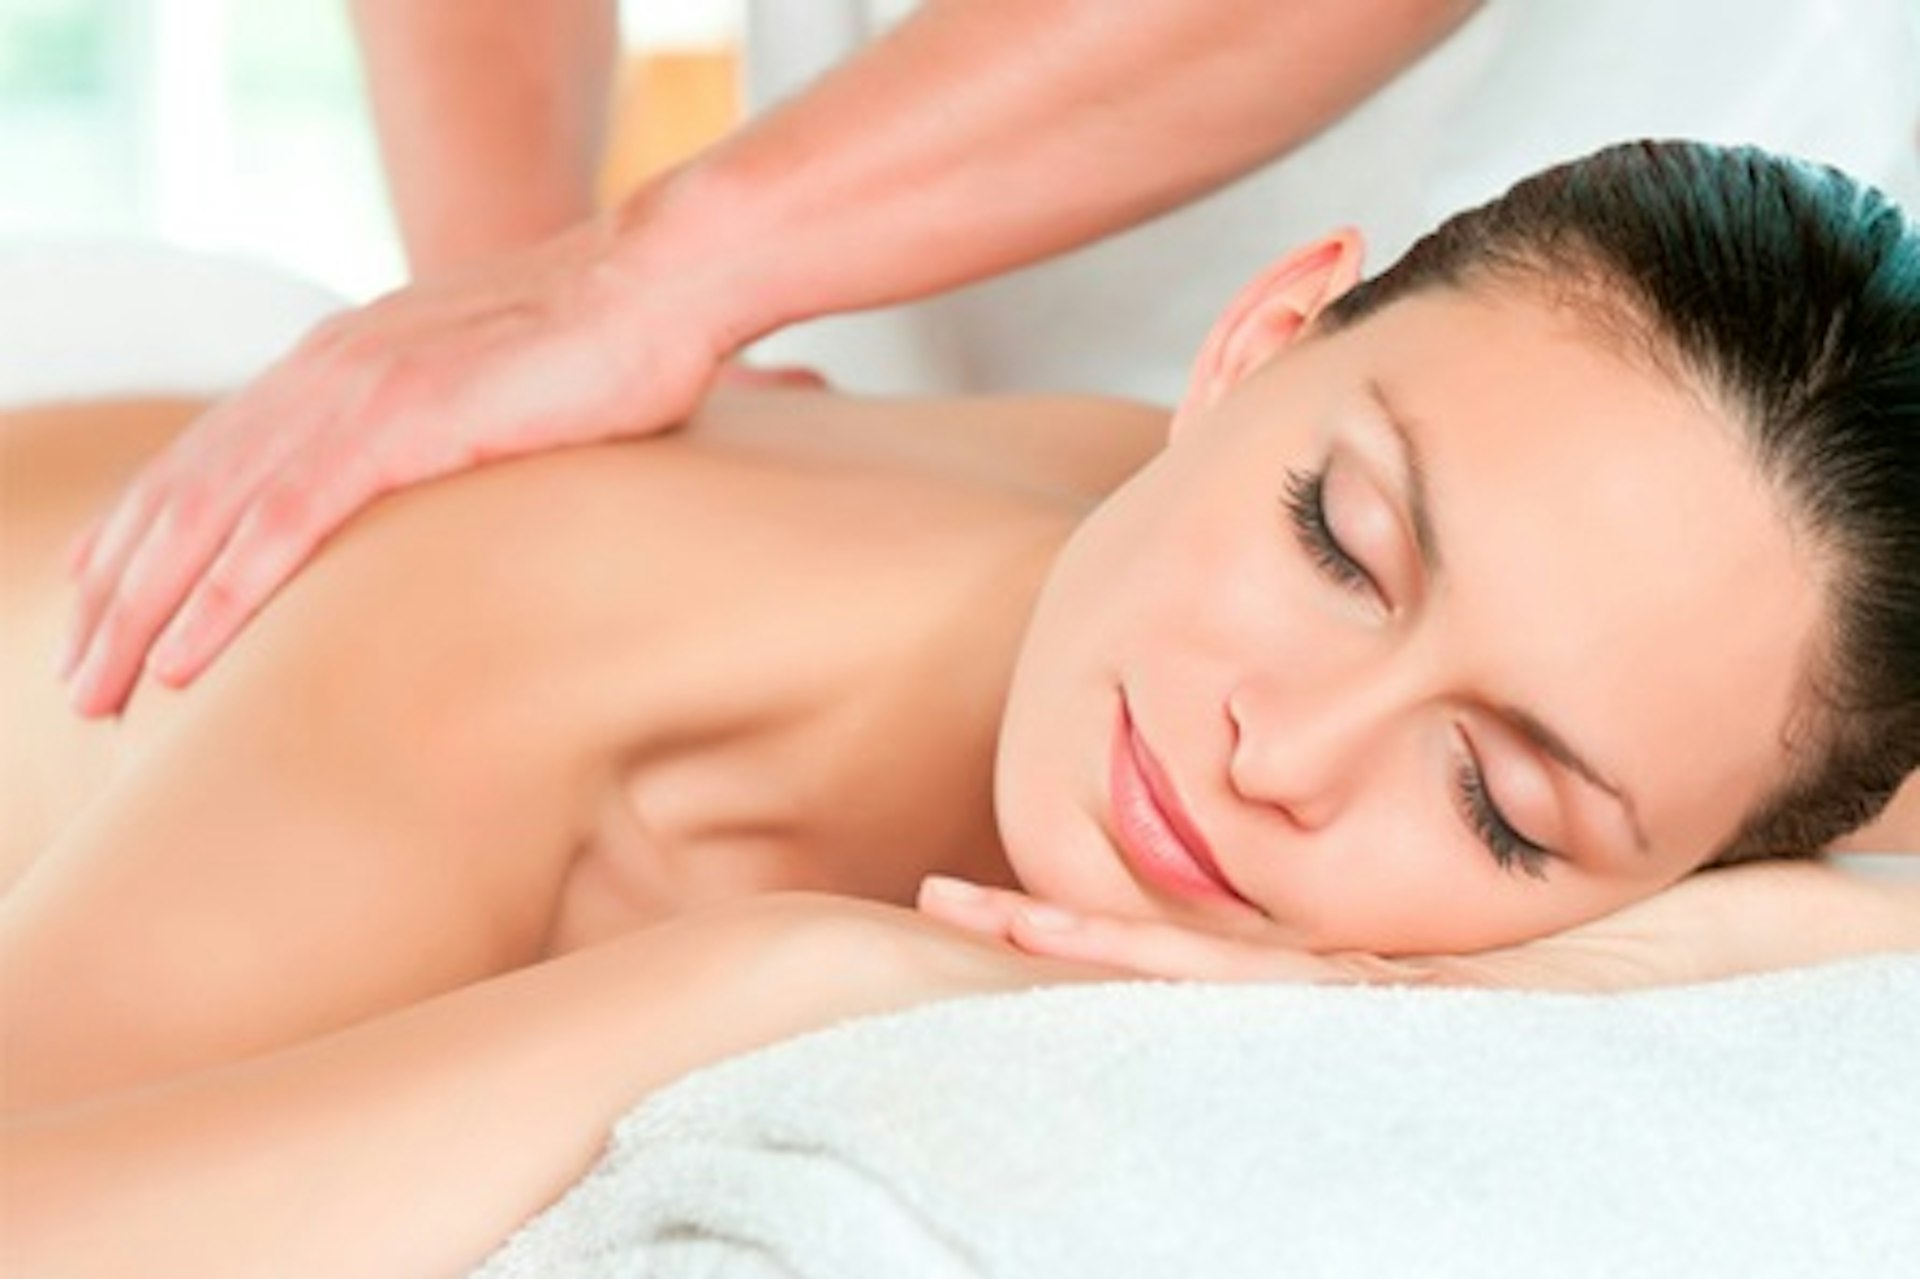 Spa Treat with Mediterranean Body Scrub, Massage and Lunch for Two at The Oxfordshire Hotel & Spa 1